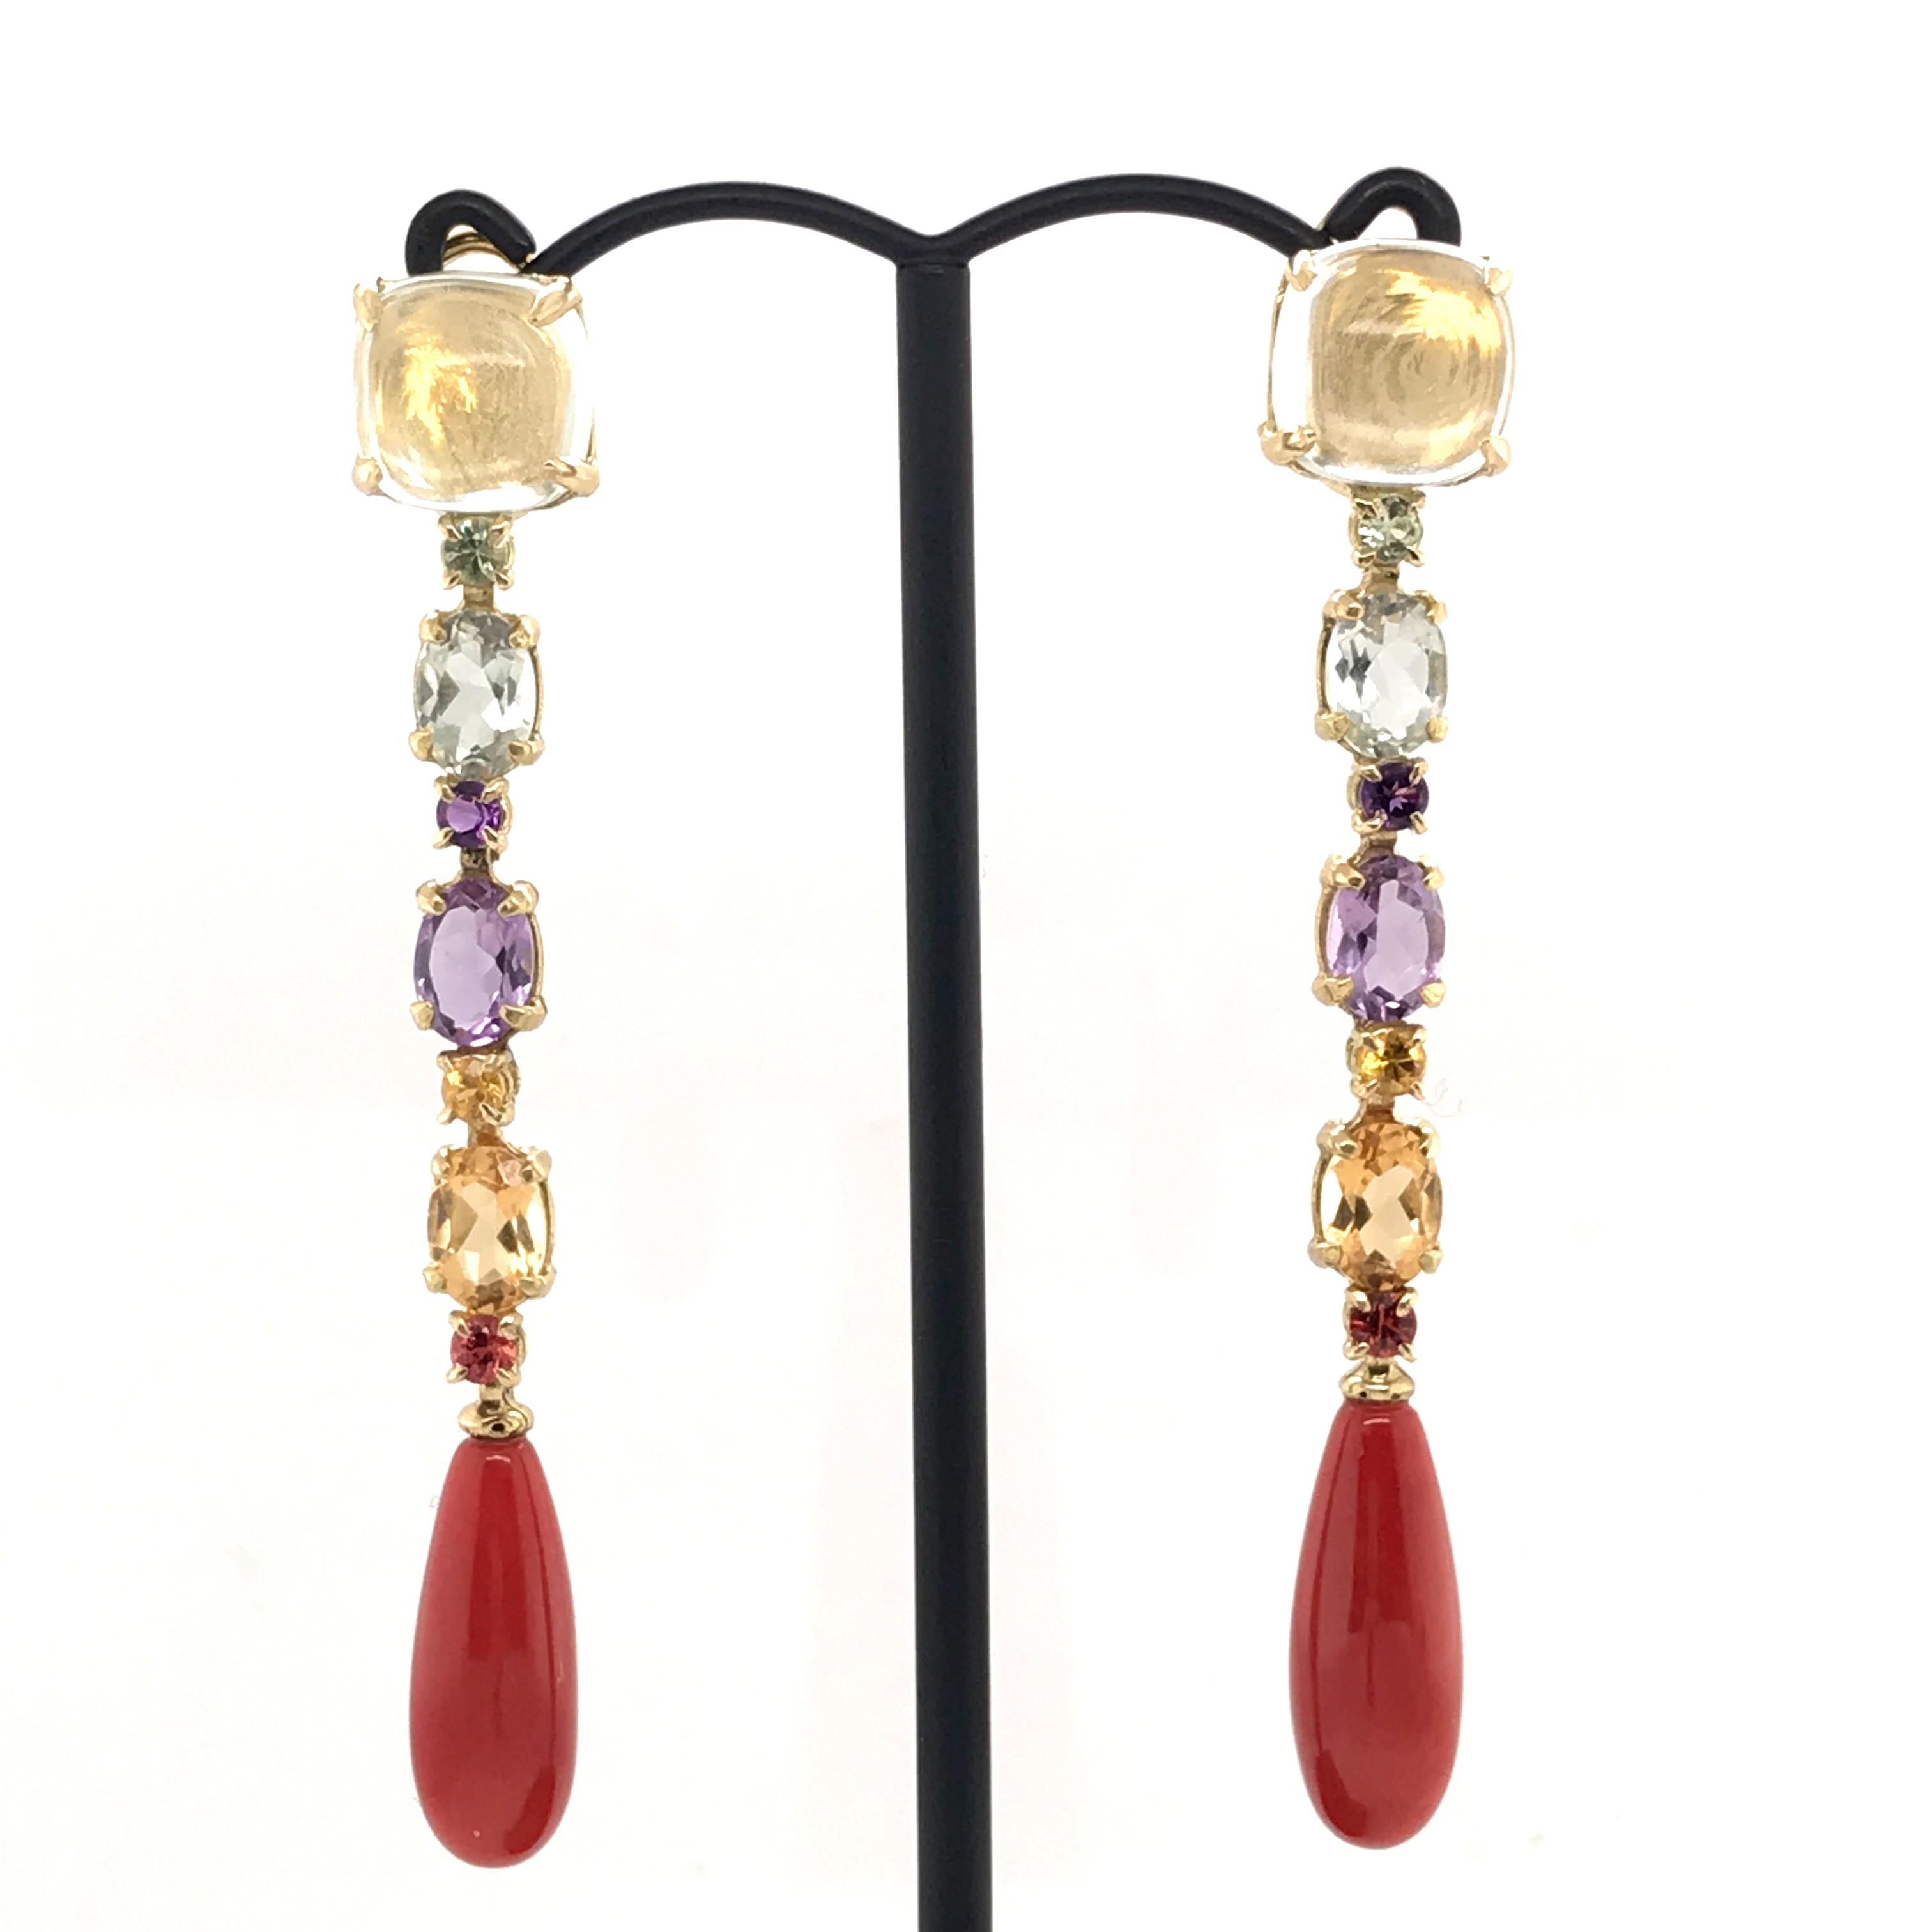 Superb chandelier earrings in 18-carat yellow gold, weighing just 6 grams, that will dazzle you with their dazzling combination of gemstones. These multi-stone earrings are adorned with amethyst, citrine, sapphire and coral, creating a striking mix